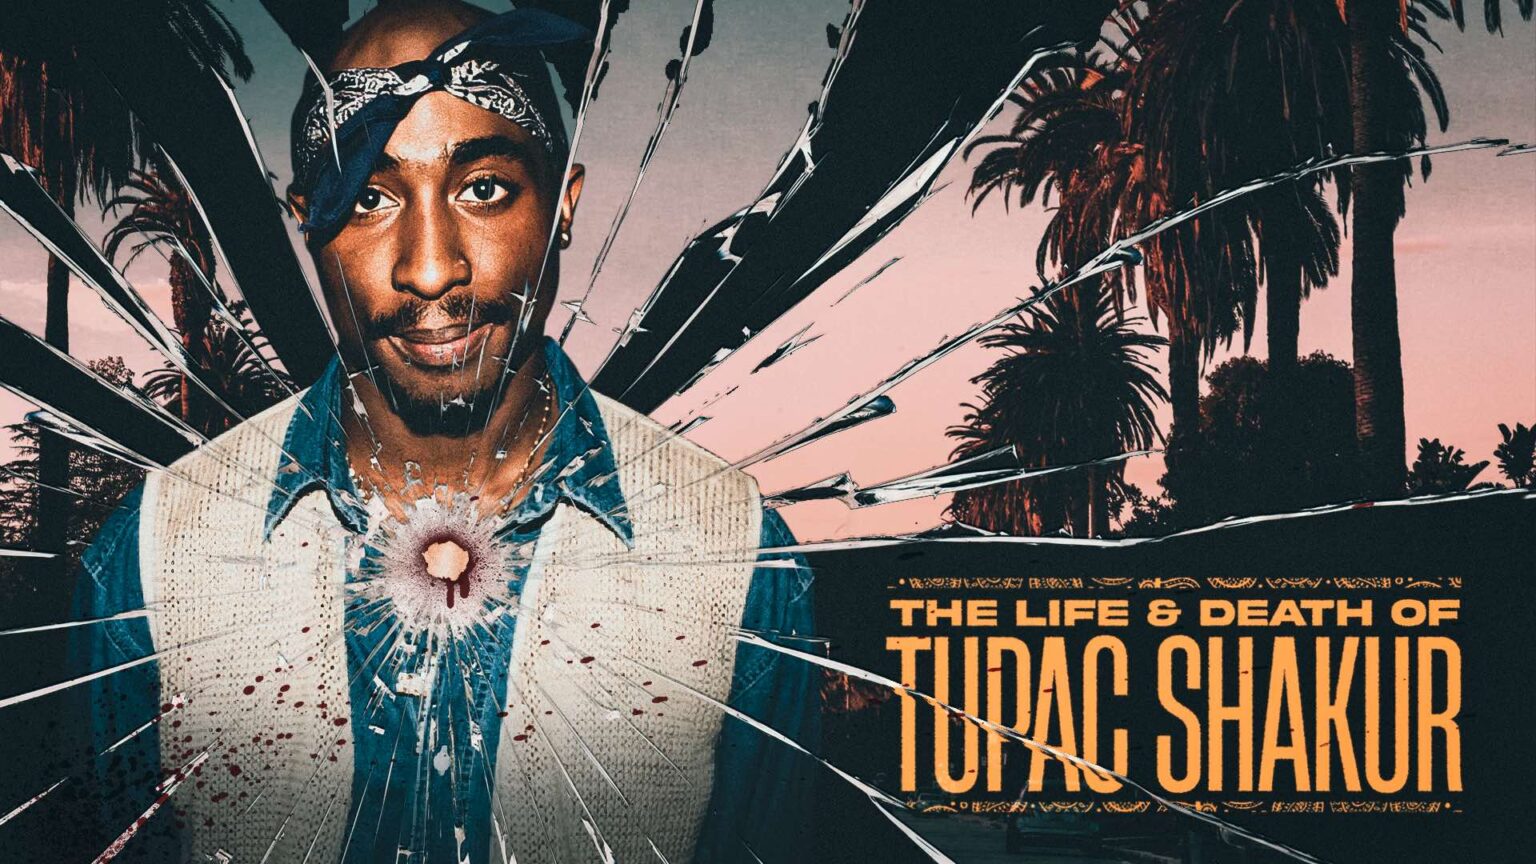 Is there any reason to believe that we may finally, finally know who killed the legendary Tupac Shakur? Let's dive into the details.